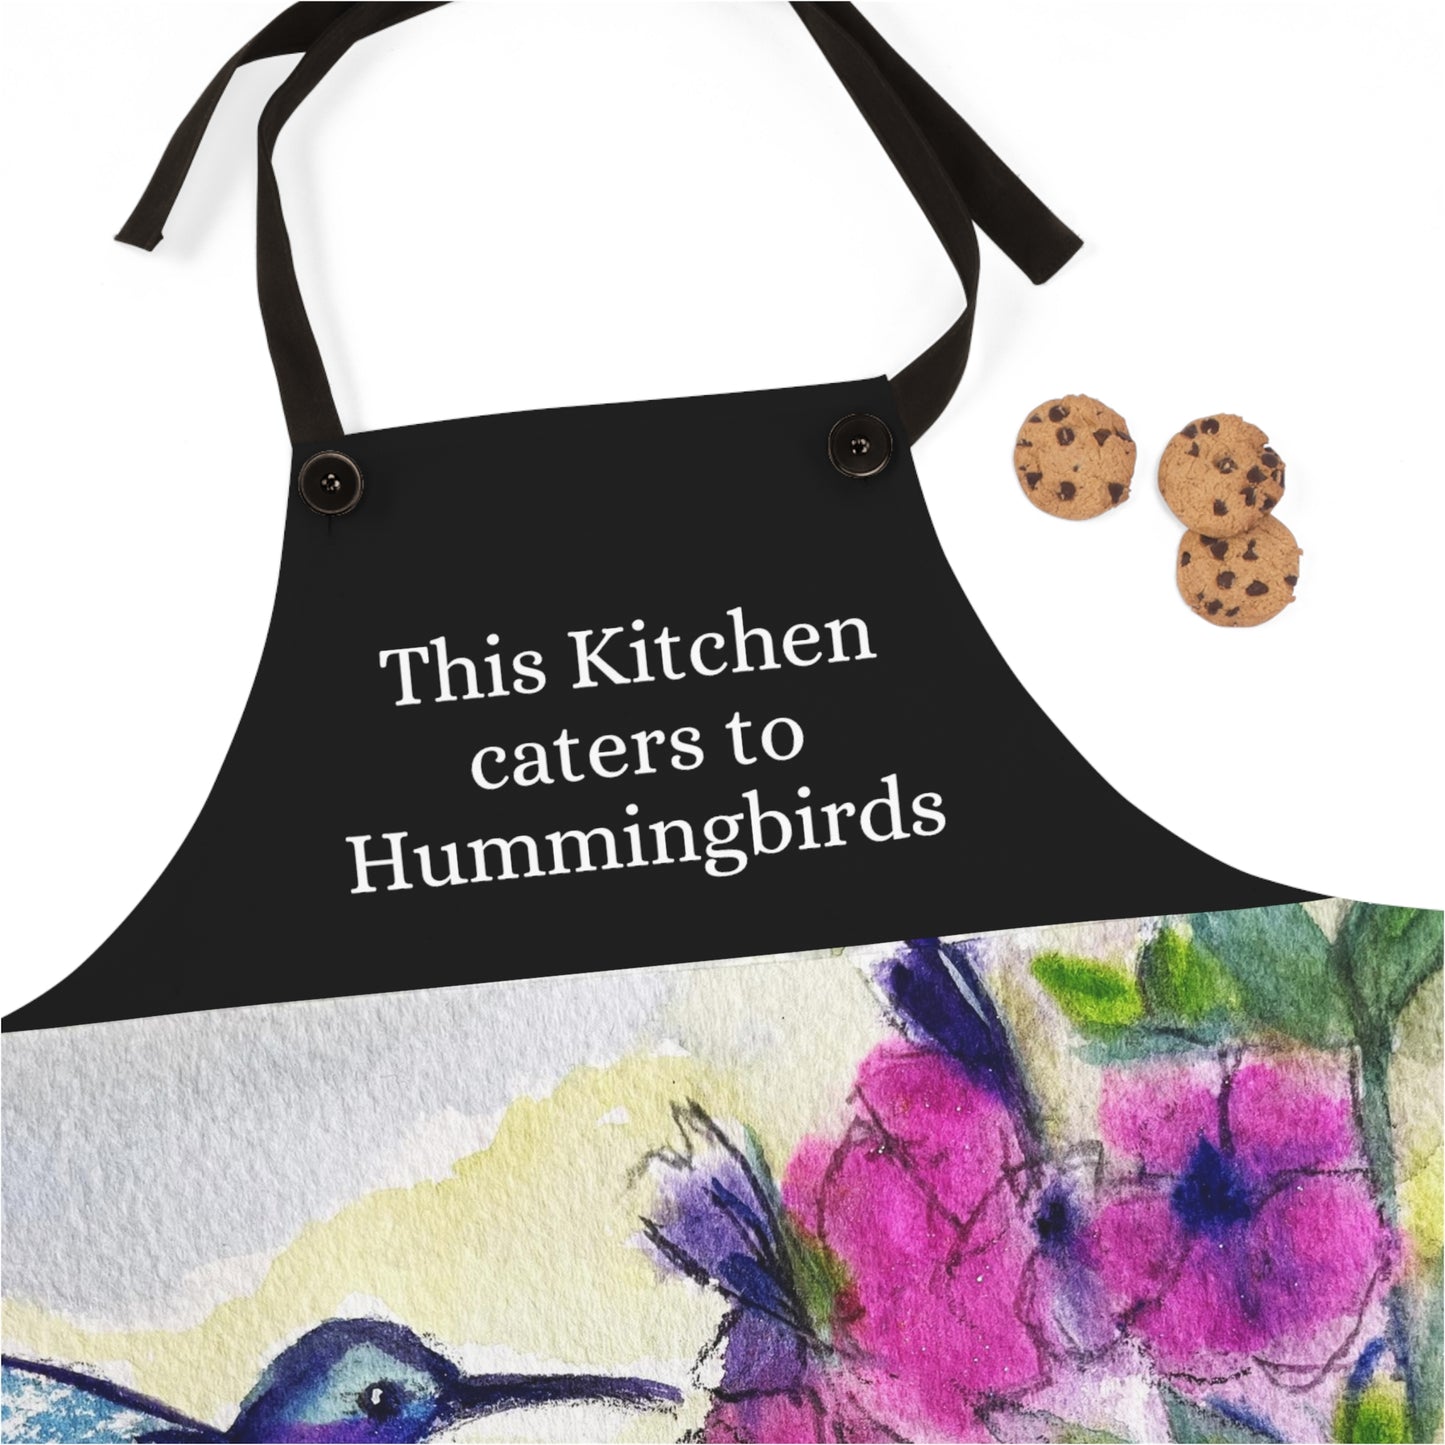 Hummingbird with Pink Flowers "This Kitchen caters to Hummingbirds" Apron